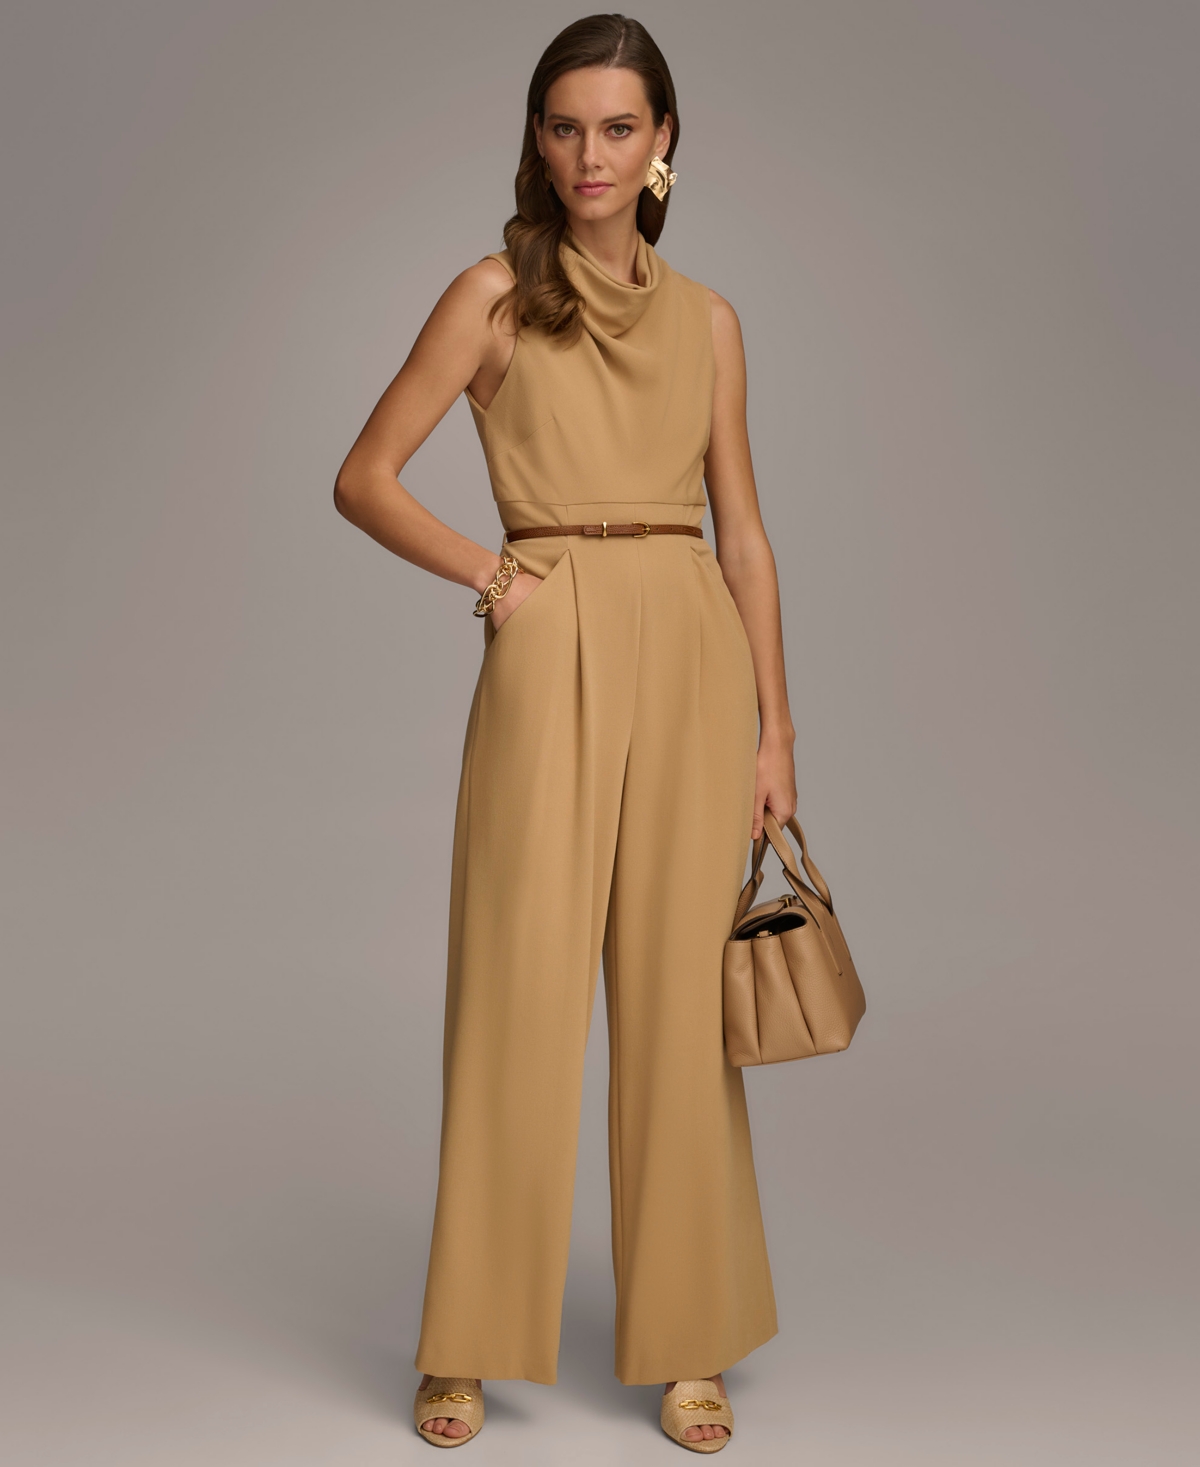 Women's Draped-Neck Belted Sleeveless Jumpsuit - Fawn